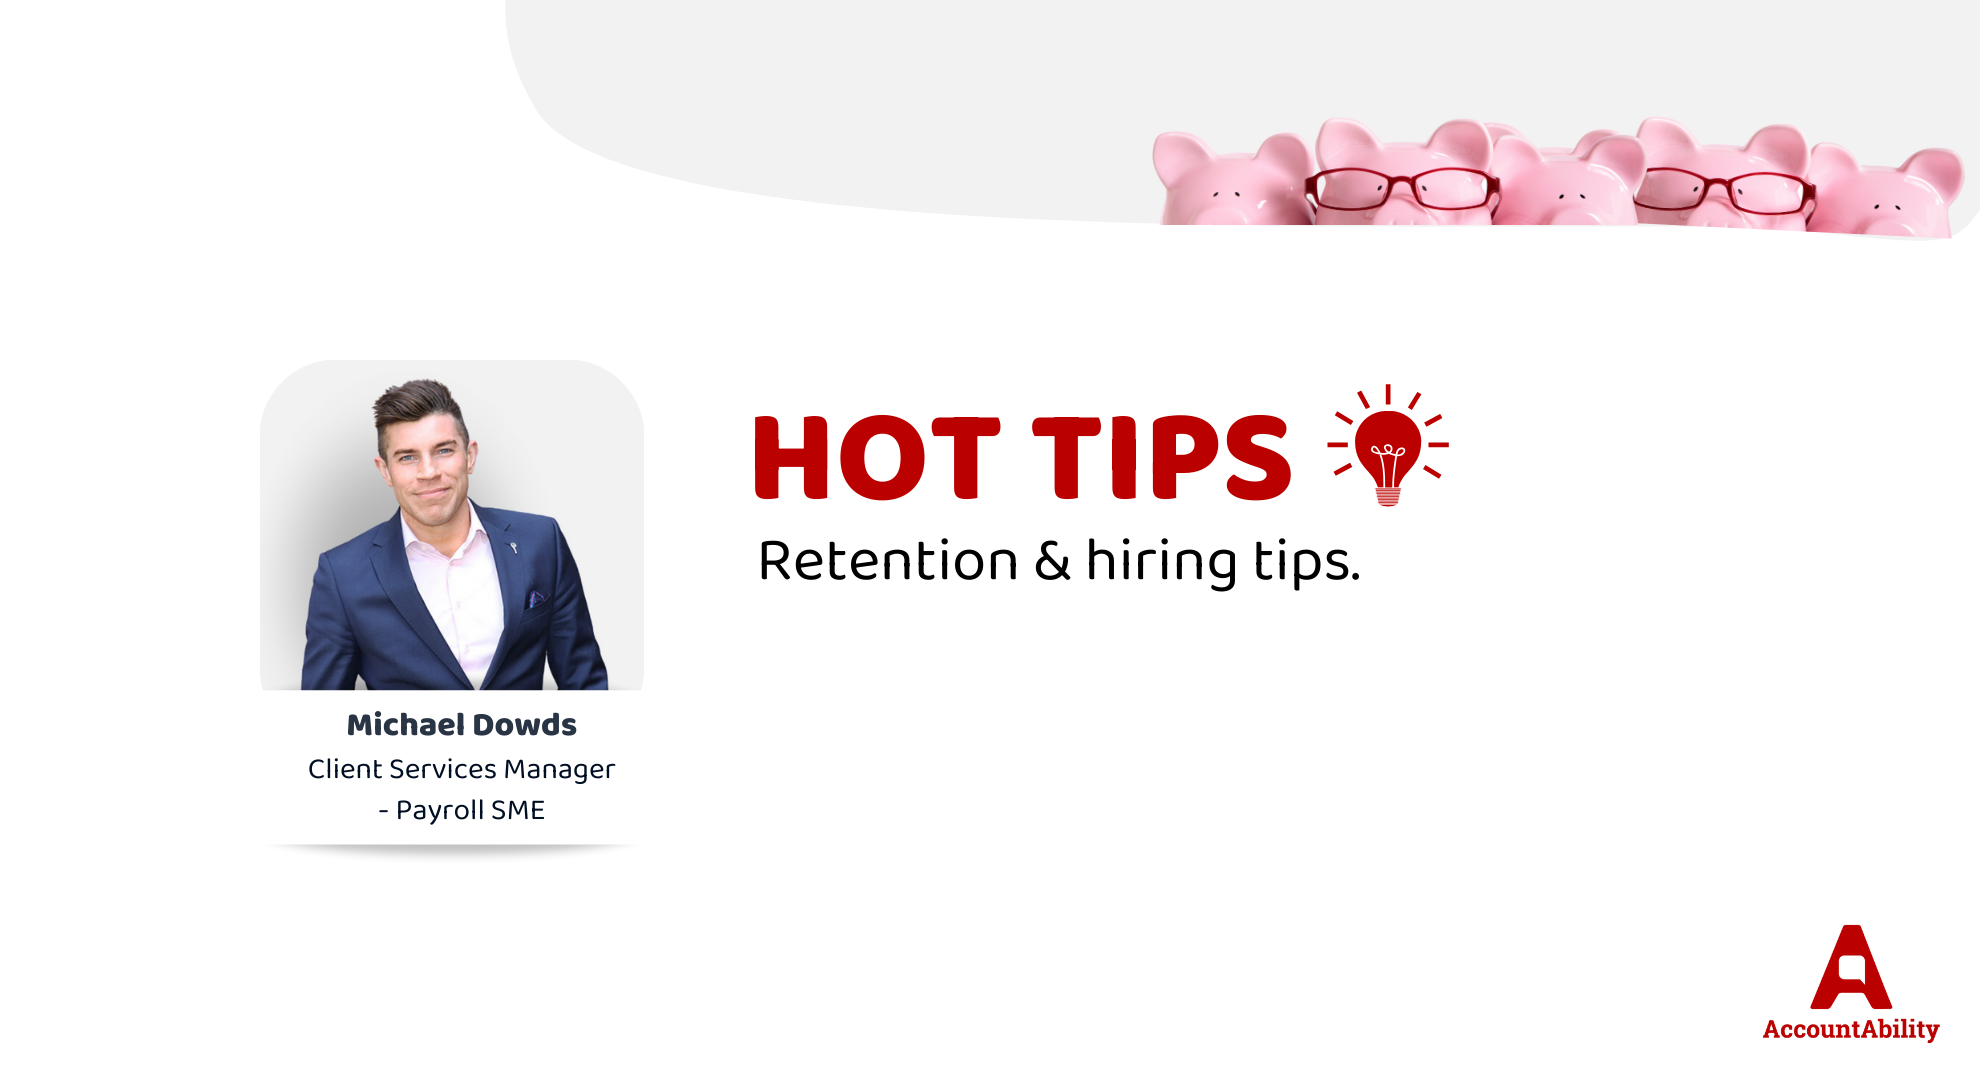 Retention and hiring tips